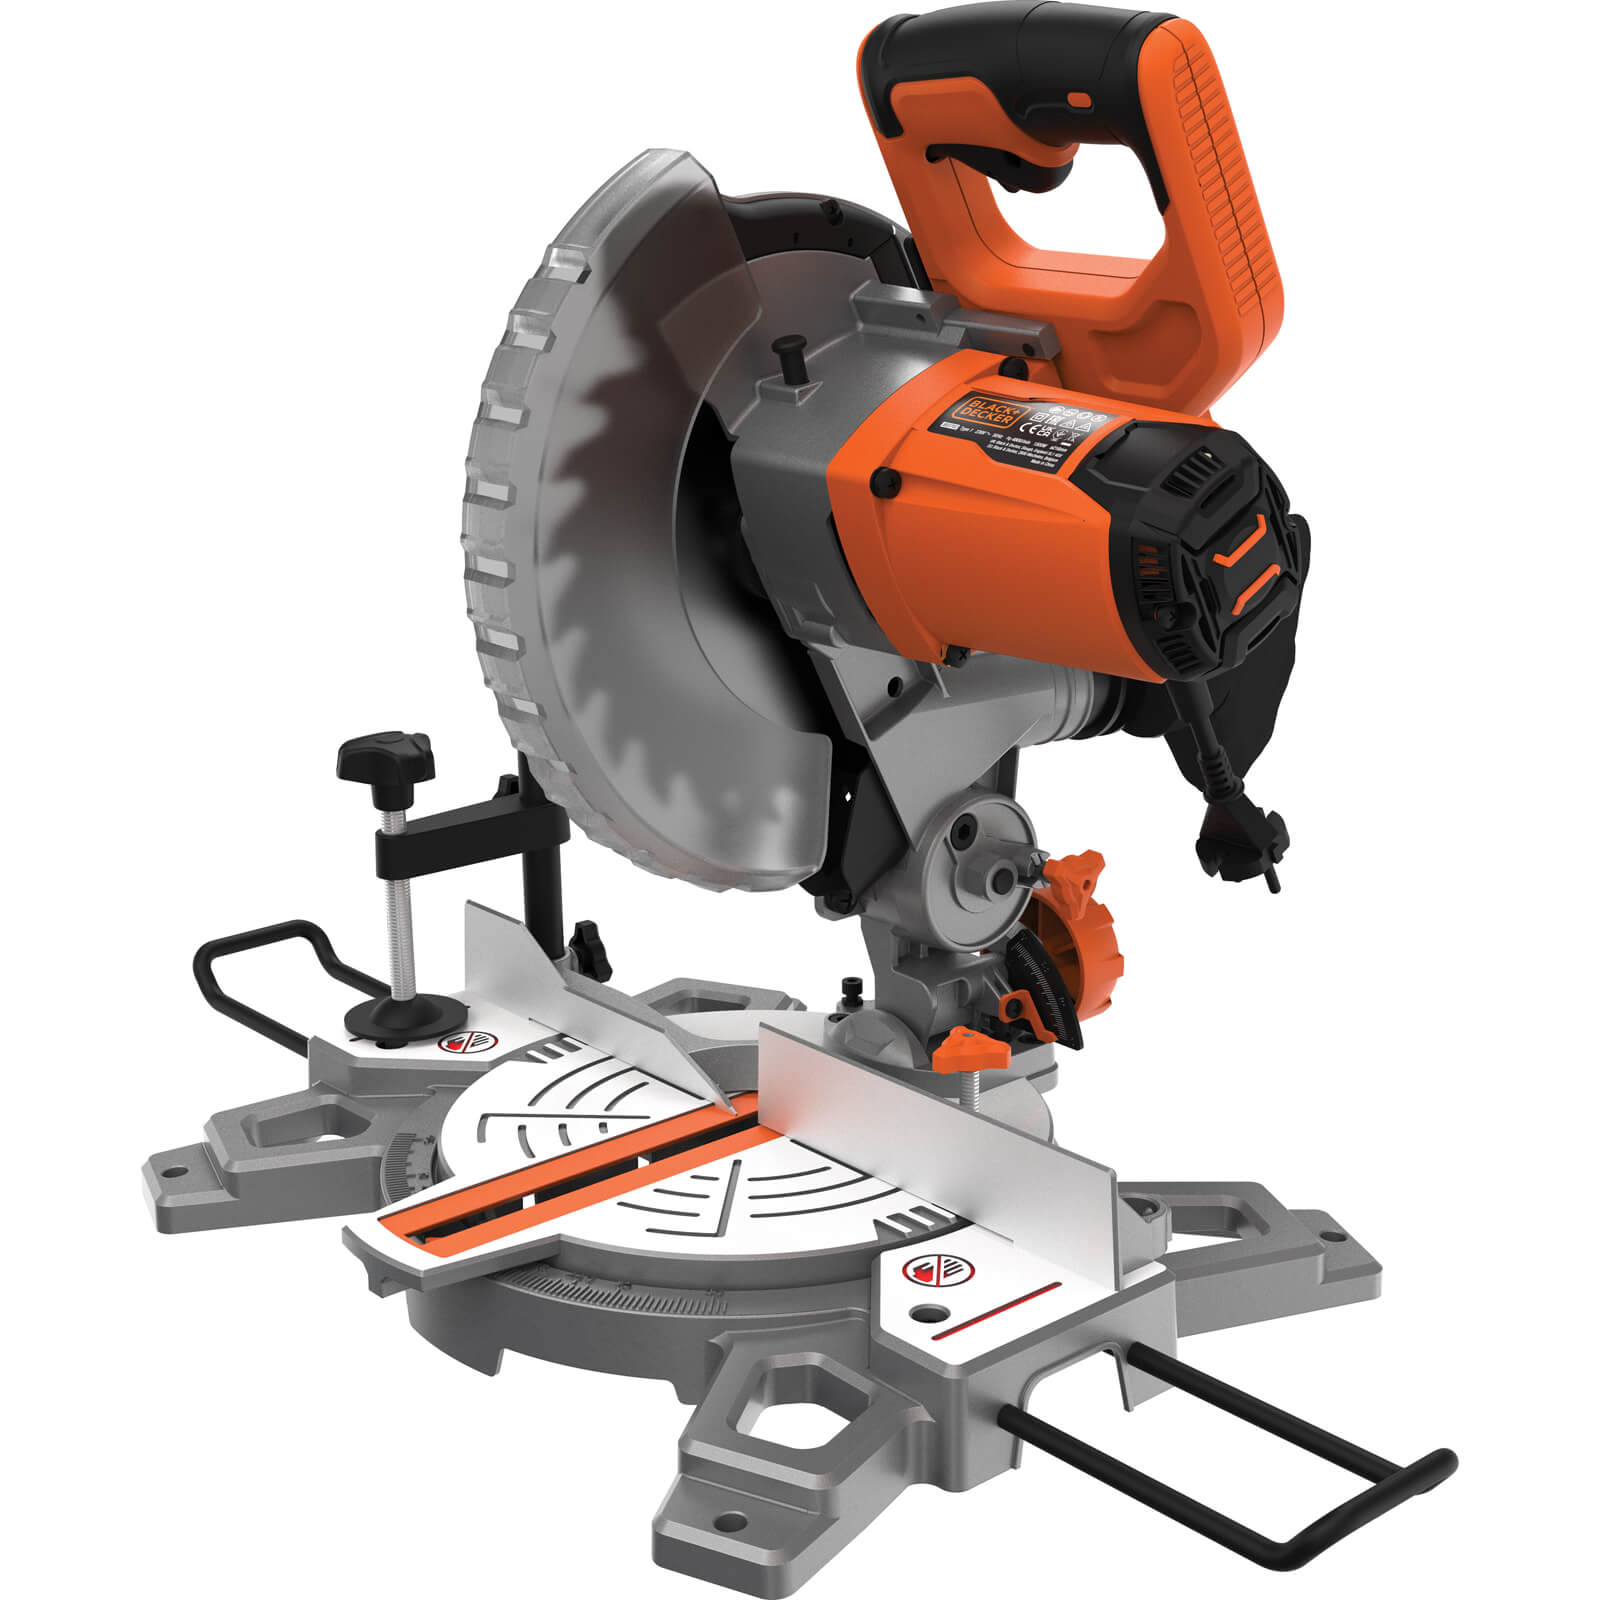 Black and Decker BES702 Compound Mitre Saw 216mm